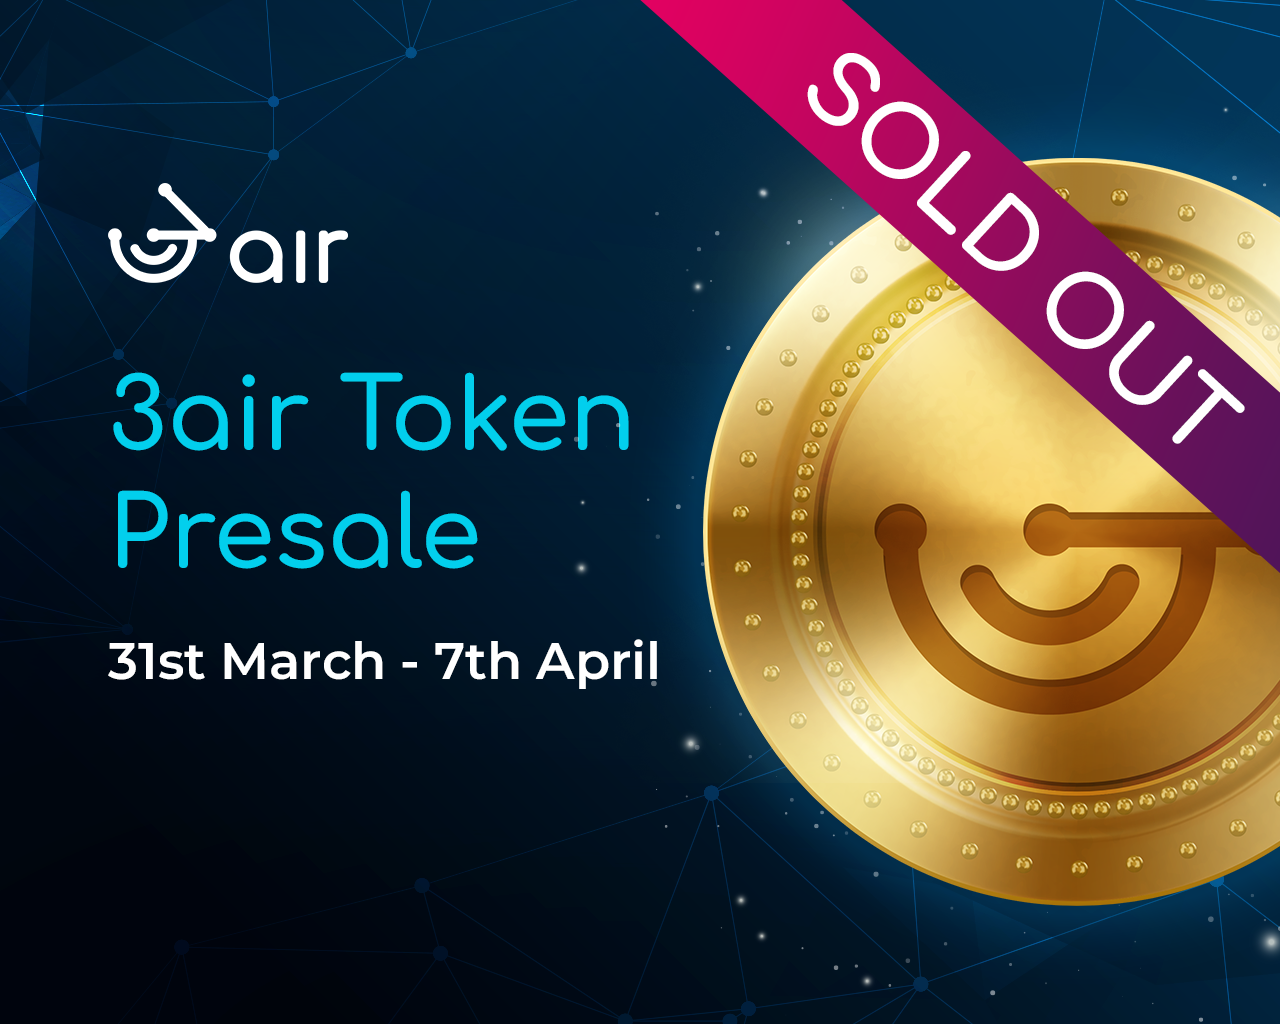 3air presale sold out